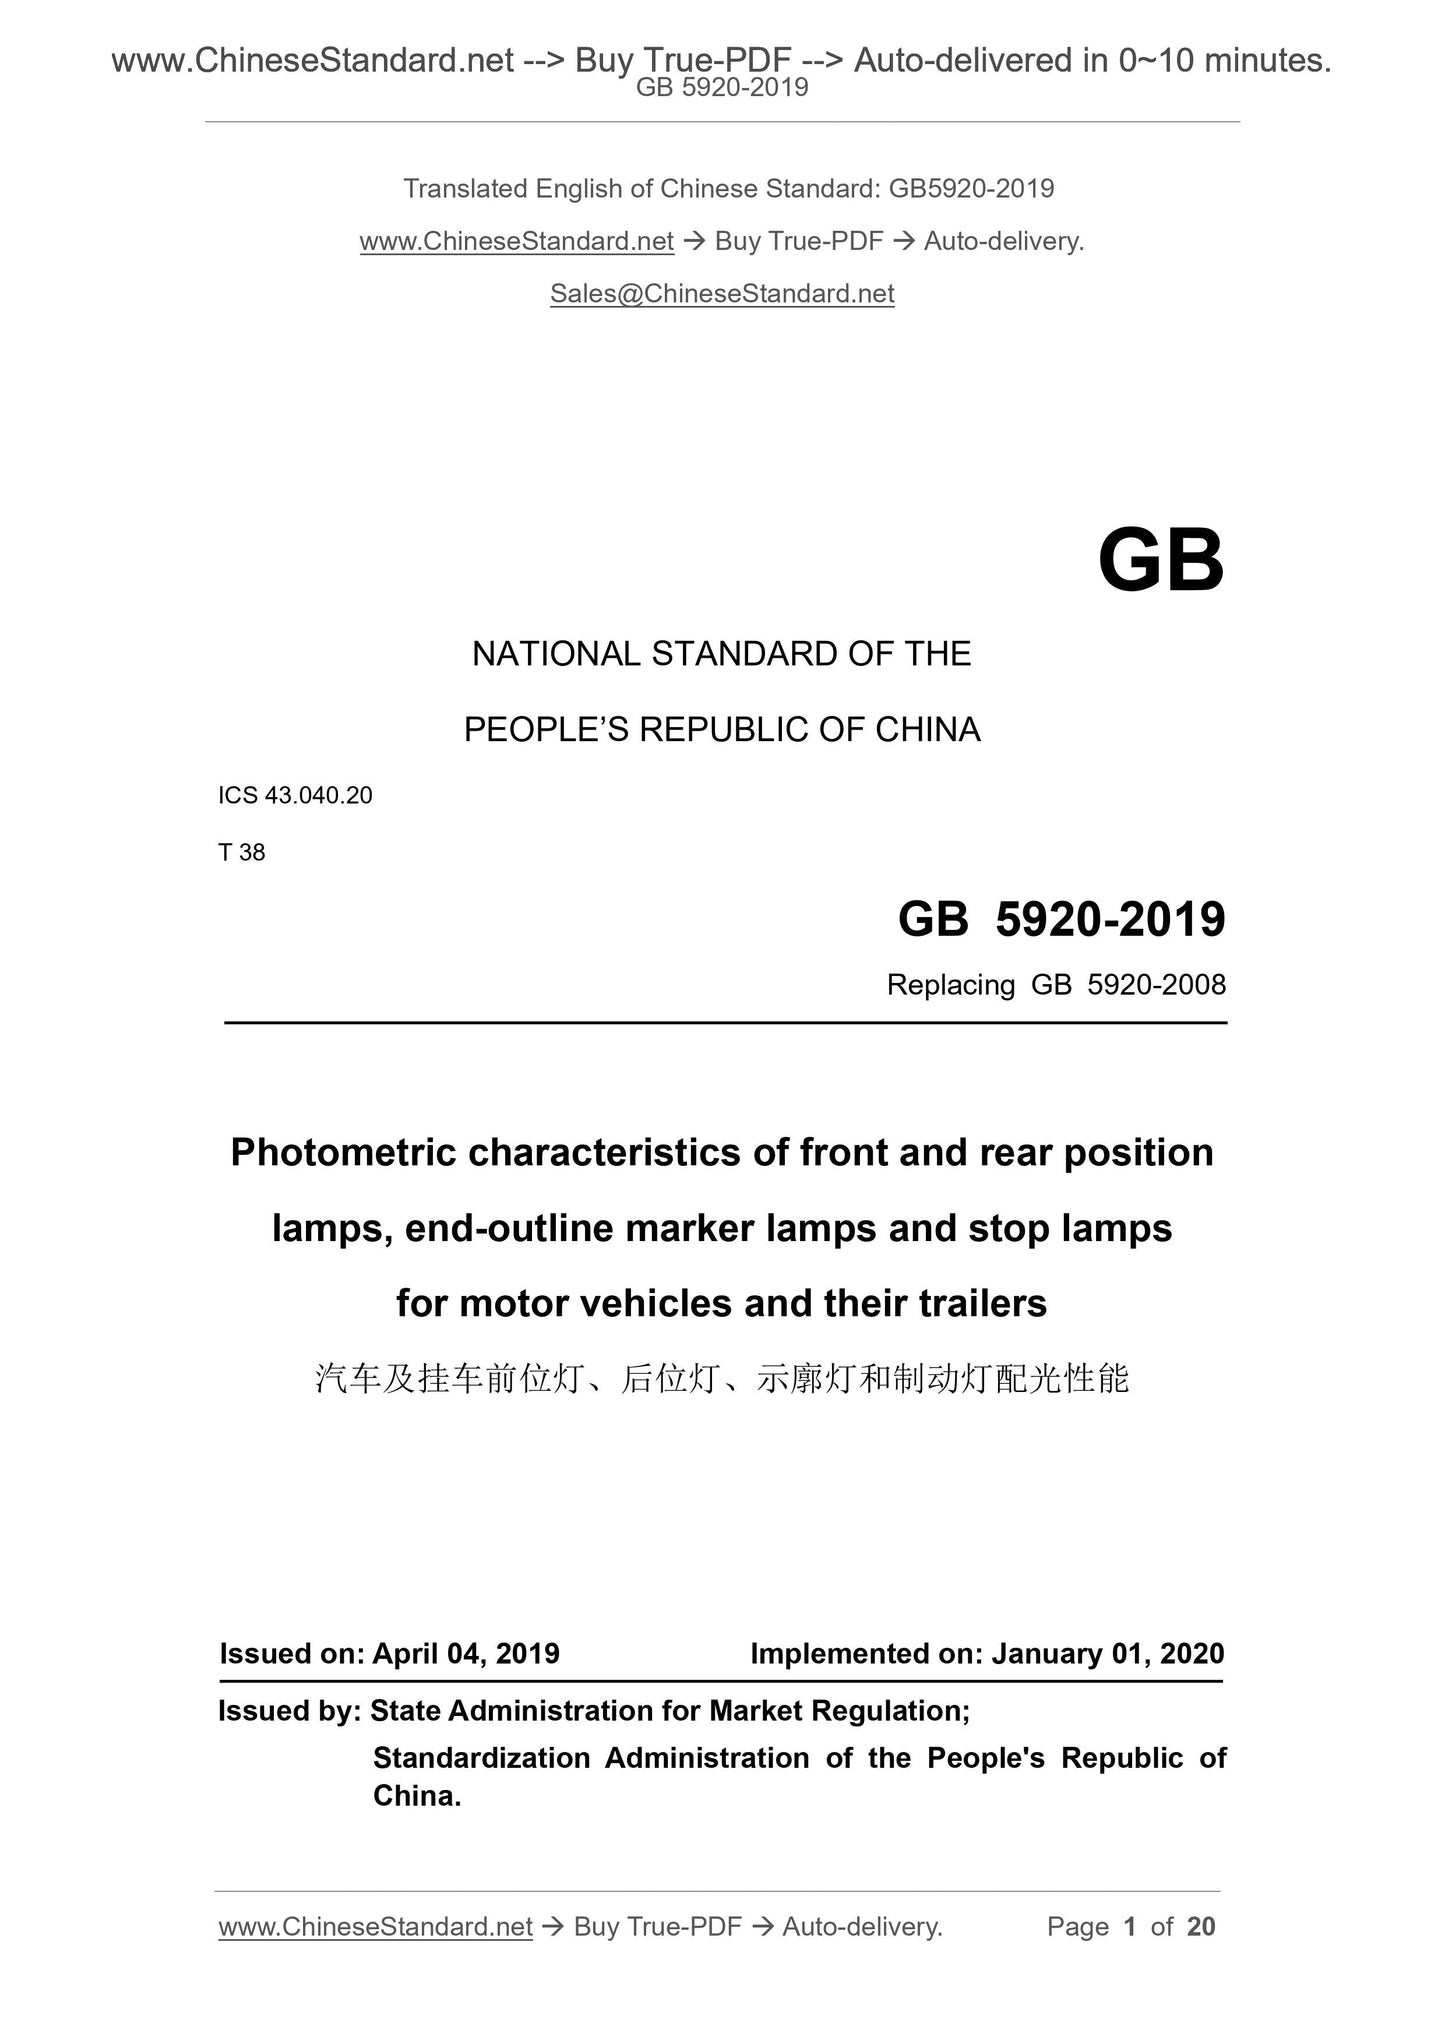 GB 5920-2019 Page 1